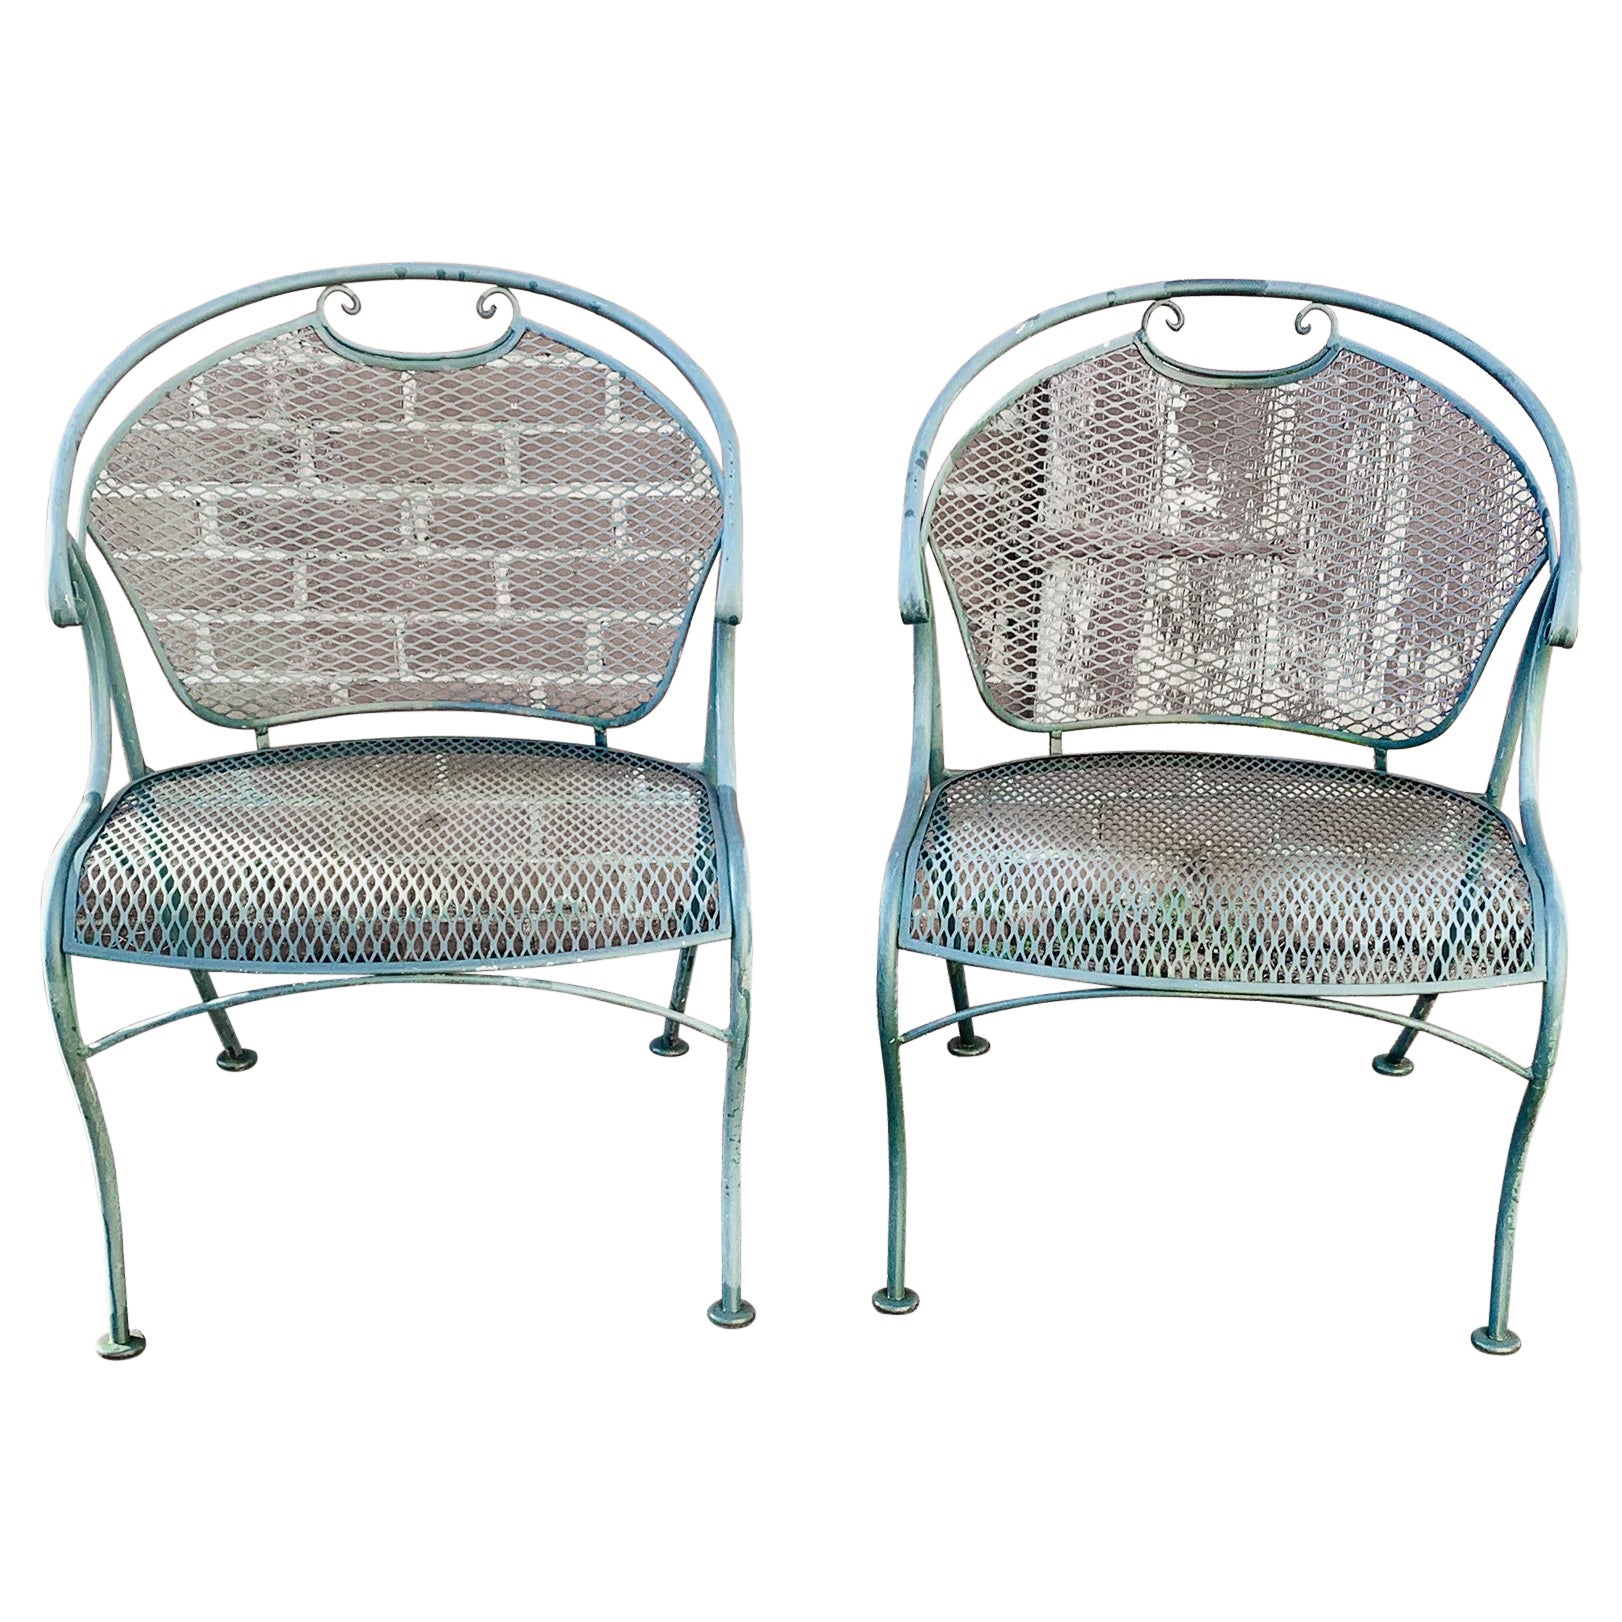 Woodard Wrought Iron Chairs For Sale